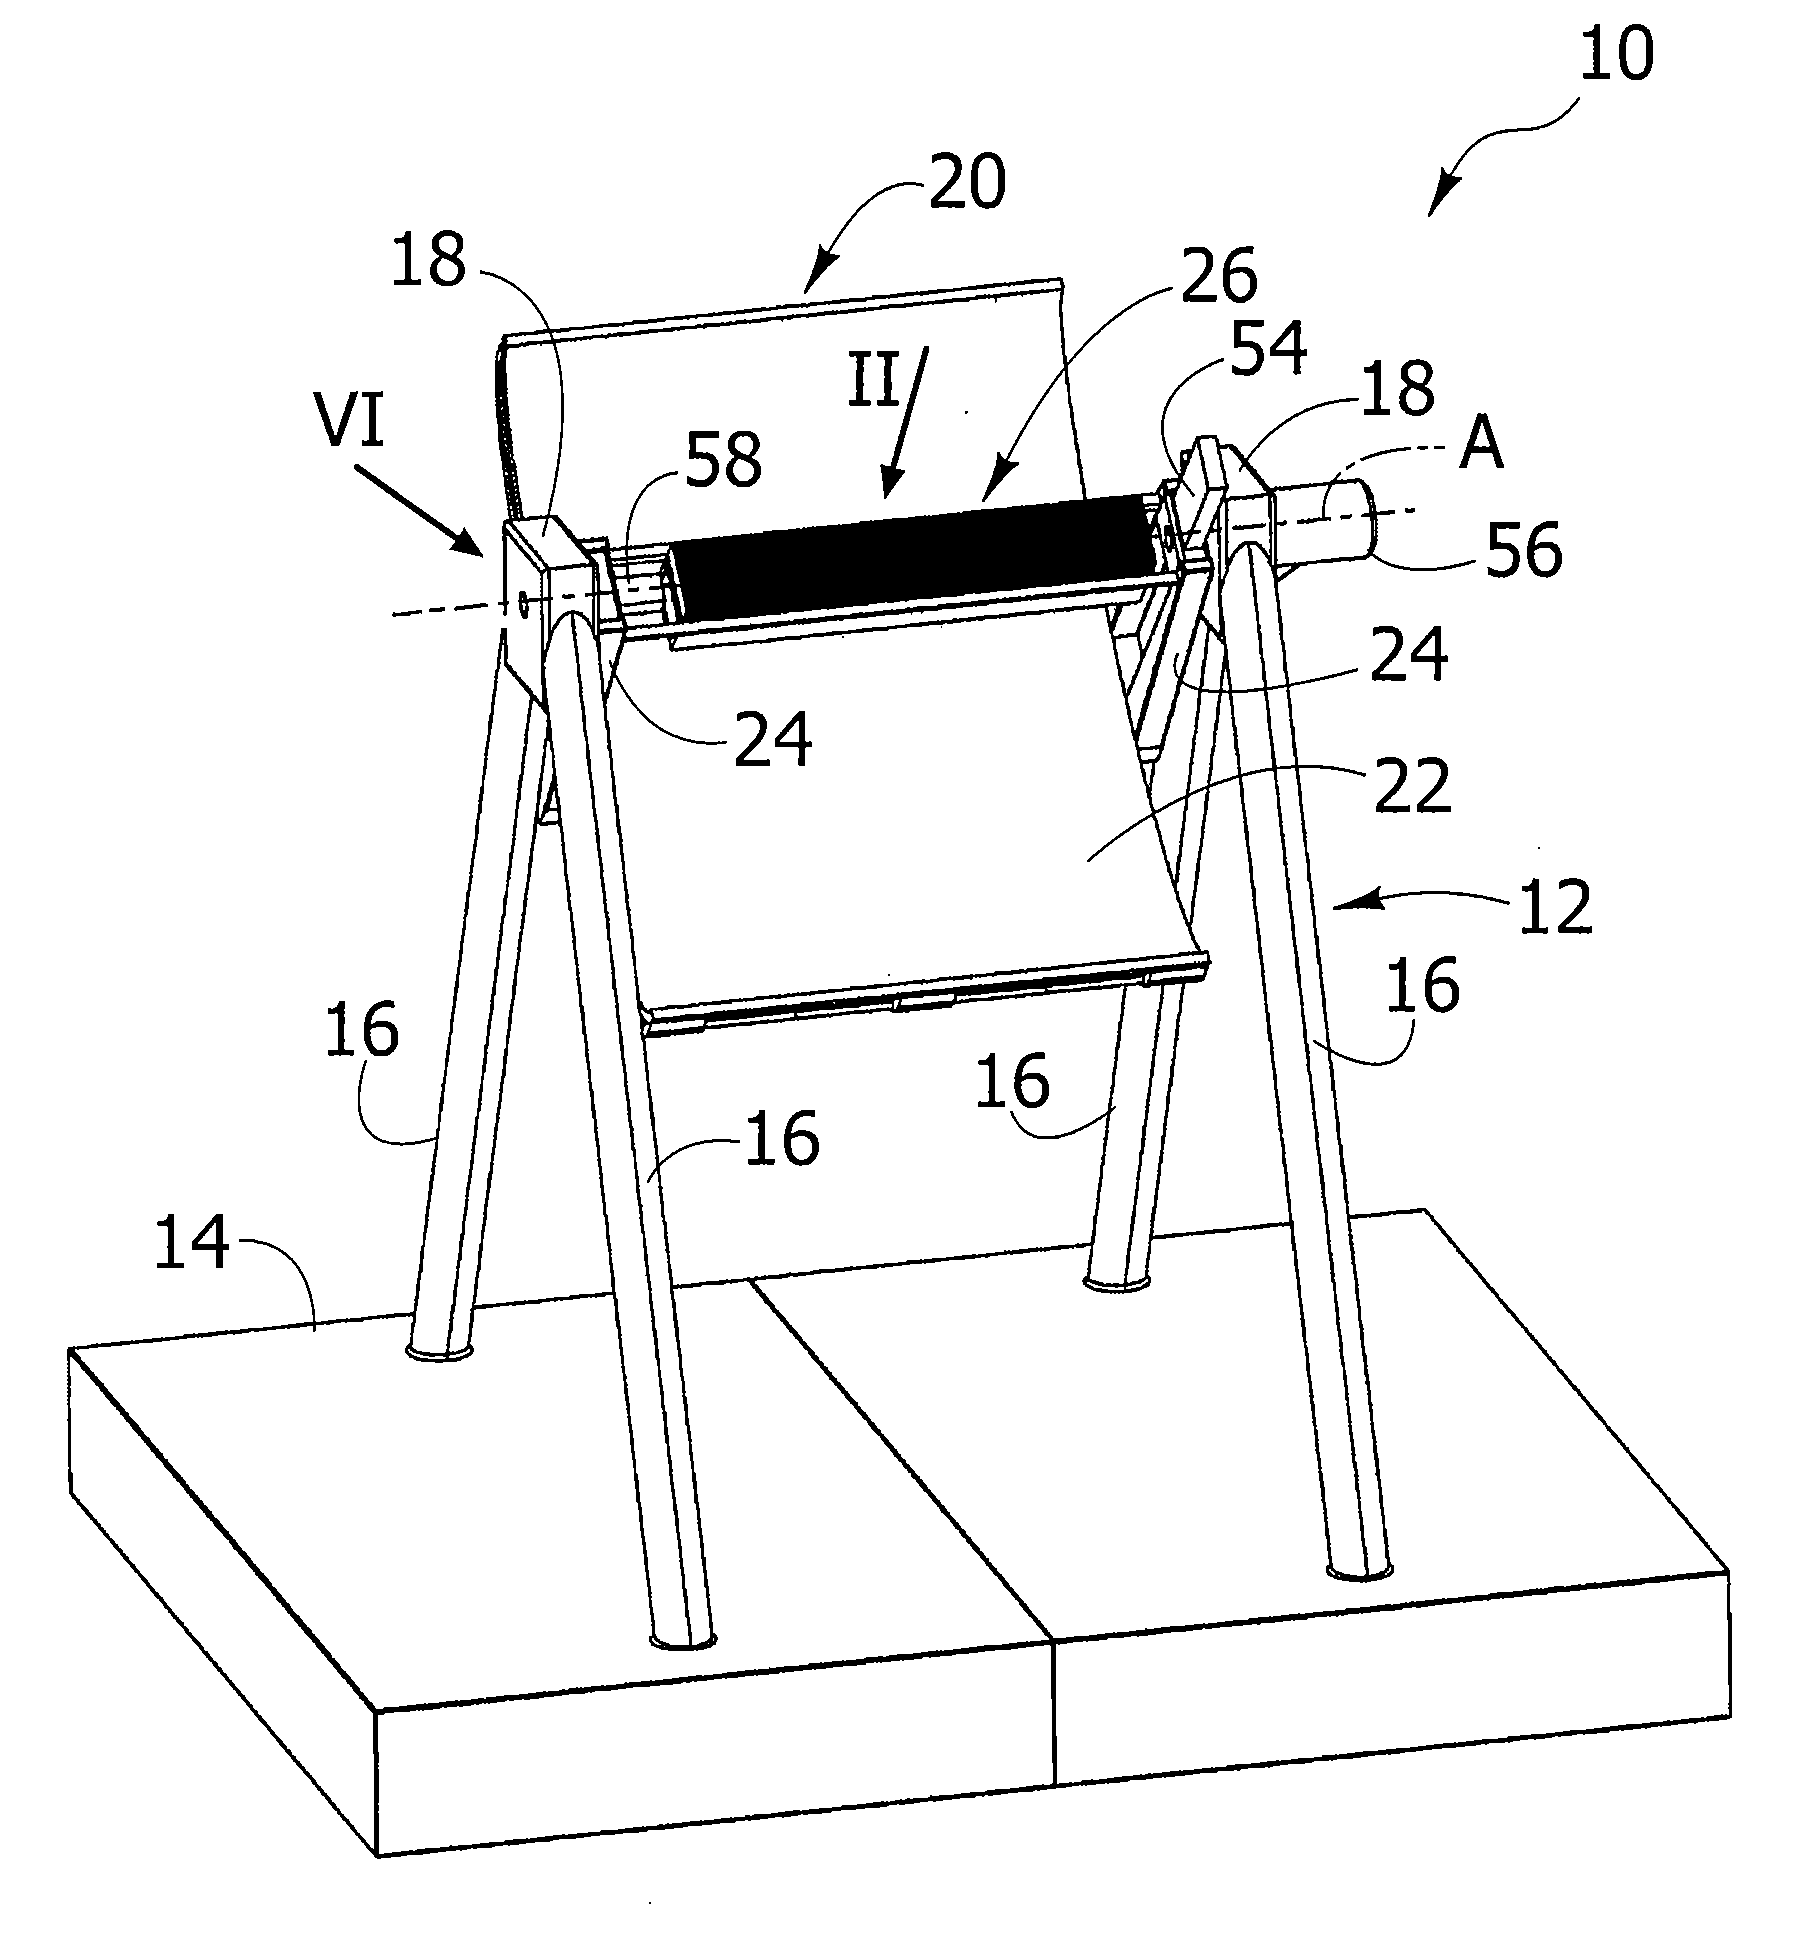 Solar receiver for a solar concentrator with a linear focus